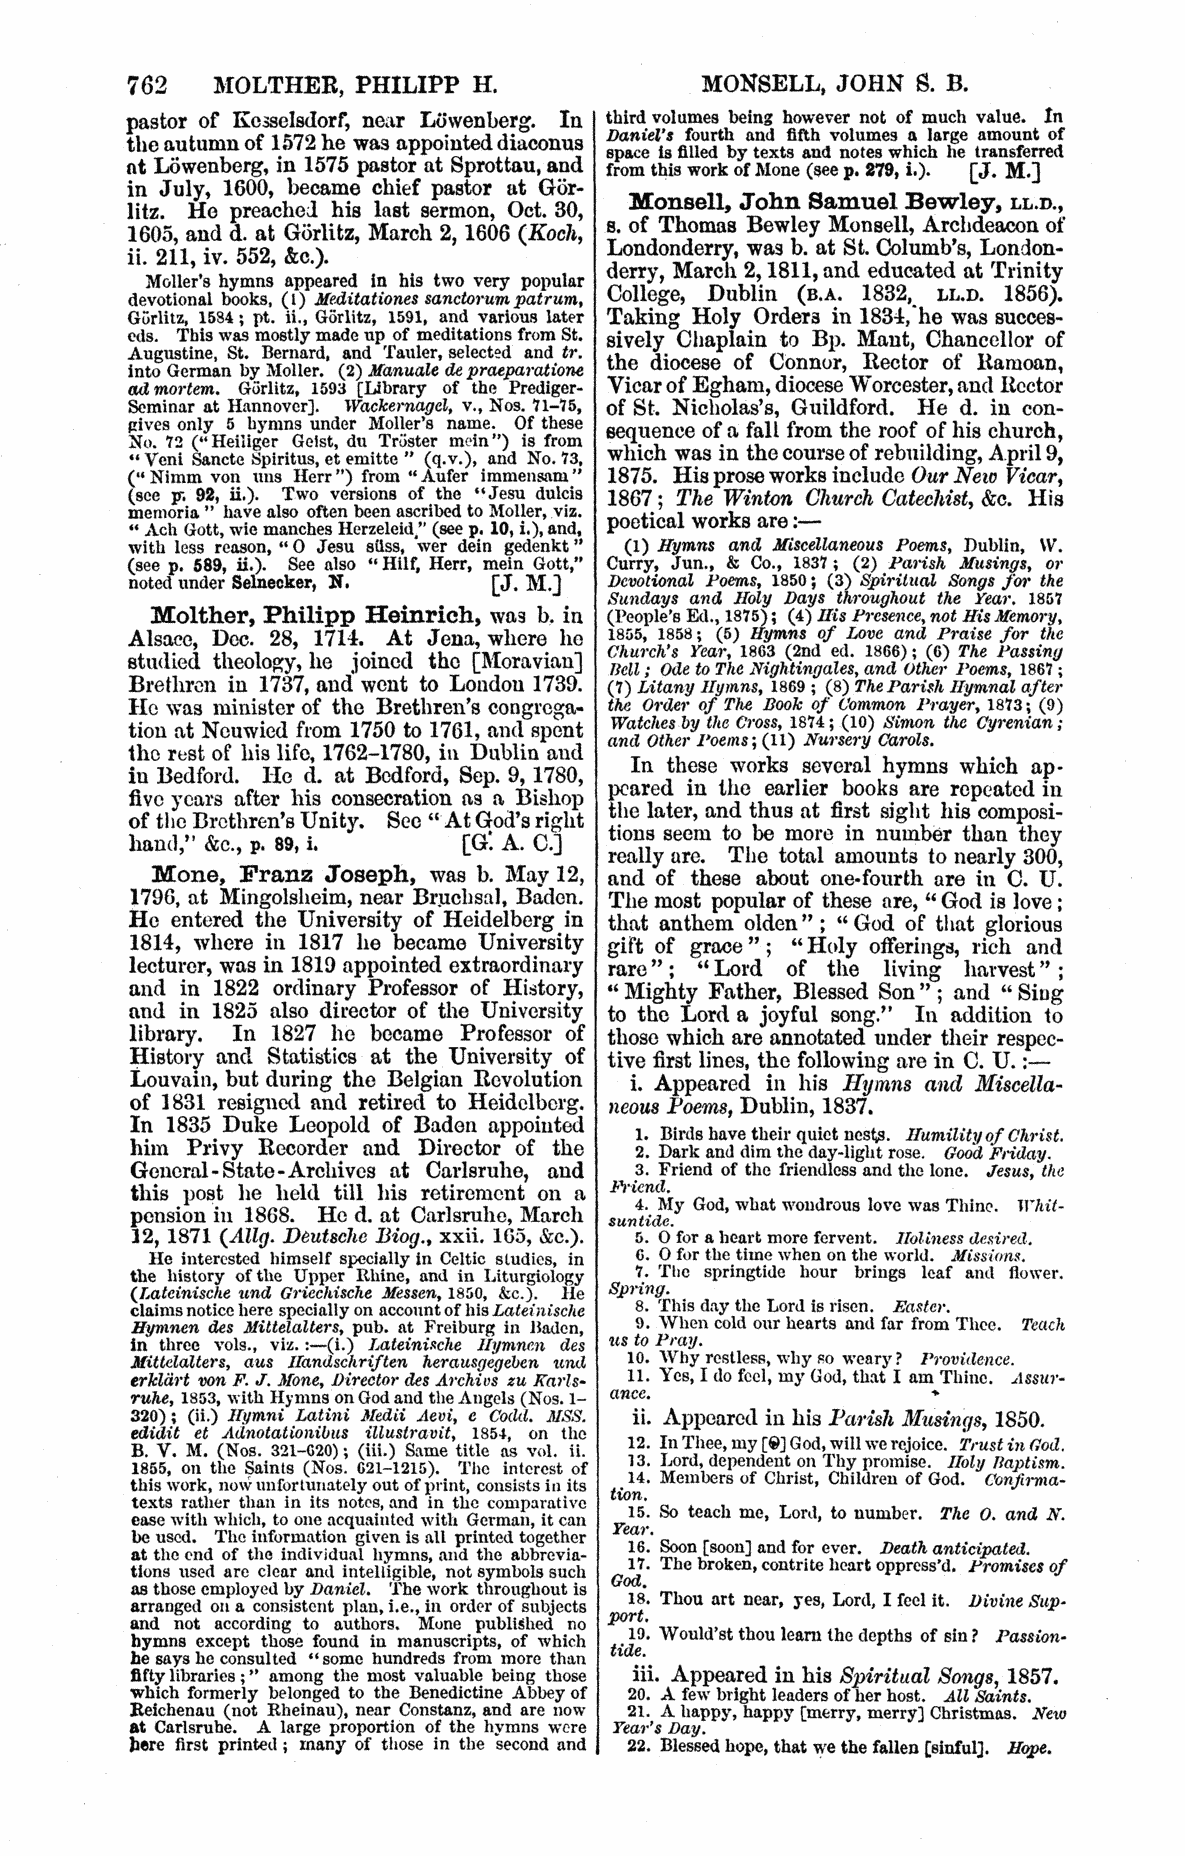 Image of page 762